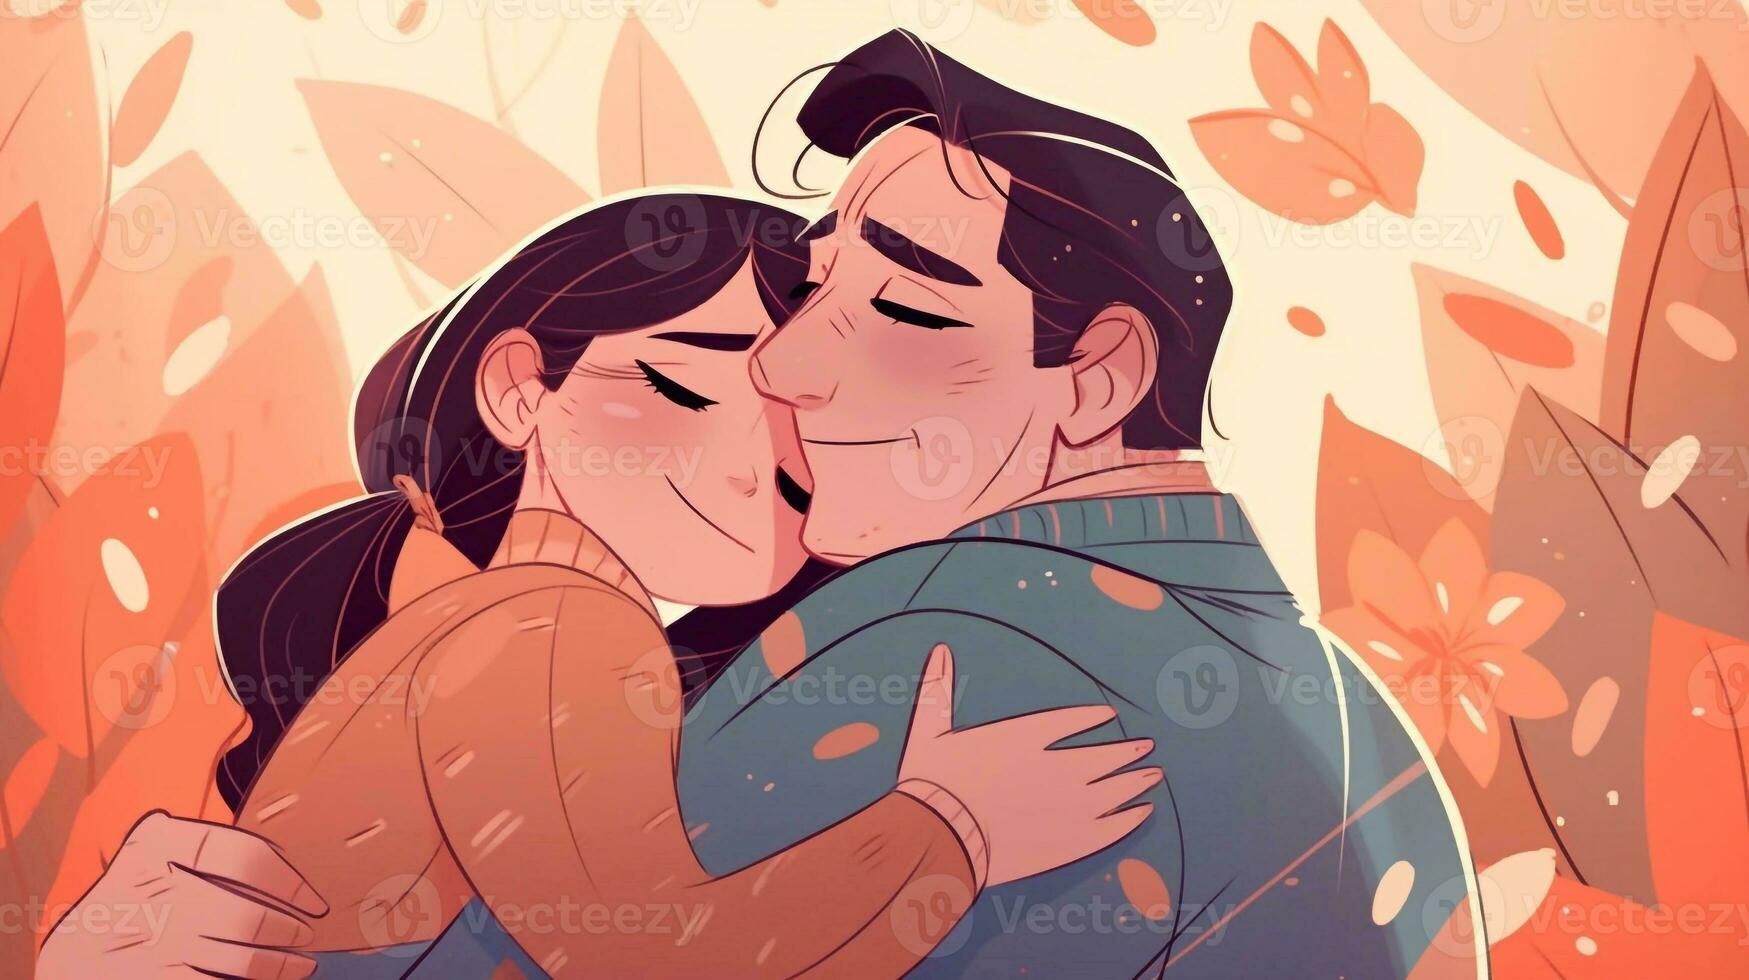 Illustration of a father hugs his daughter in a warm and heartfelt hug in cartoon style photo